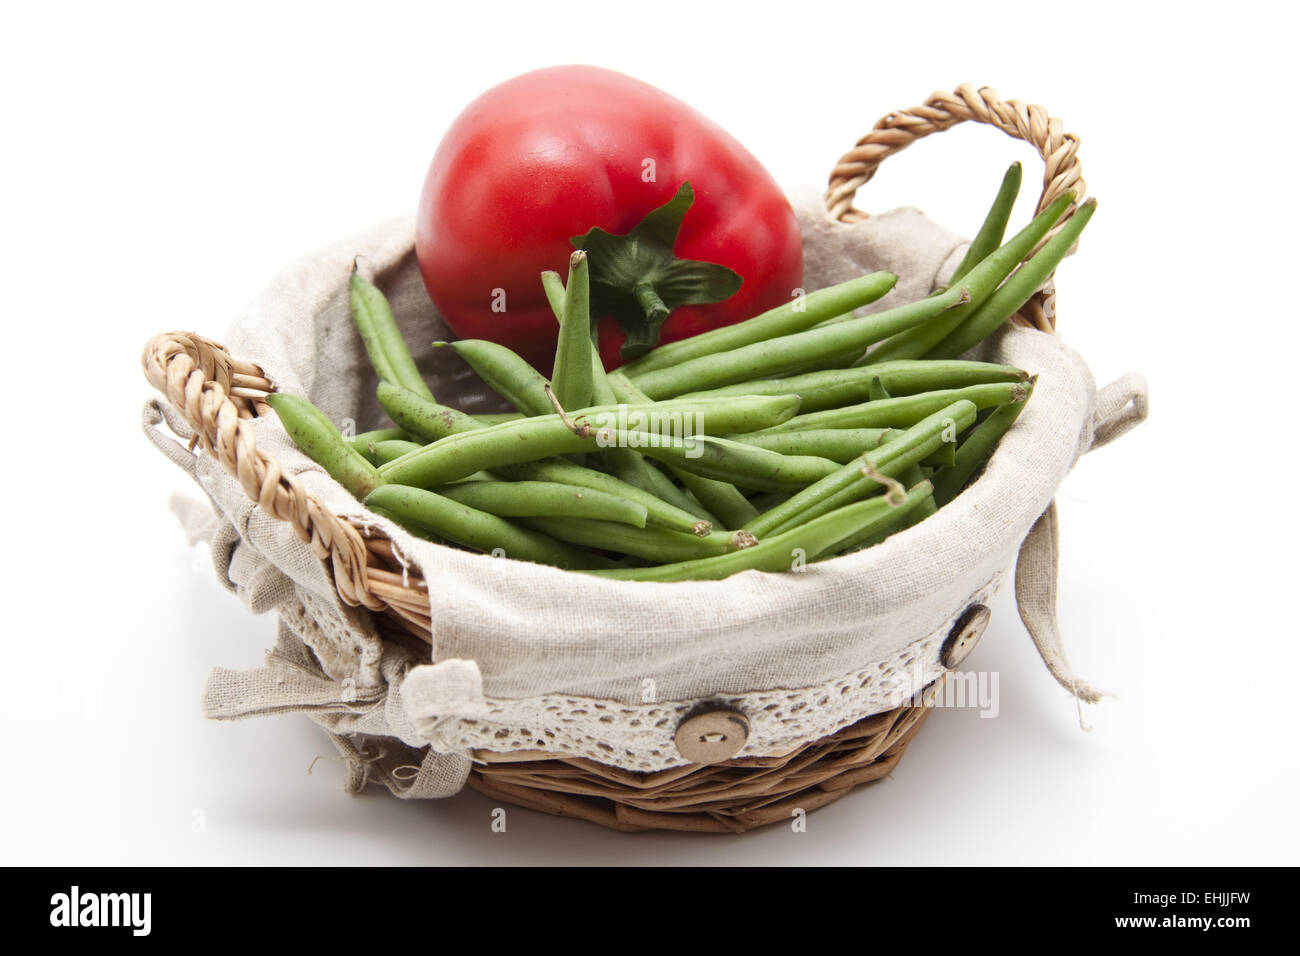 Tomato with beans in the basket Stock Photo